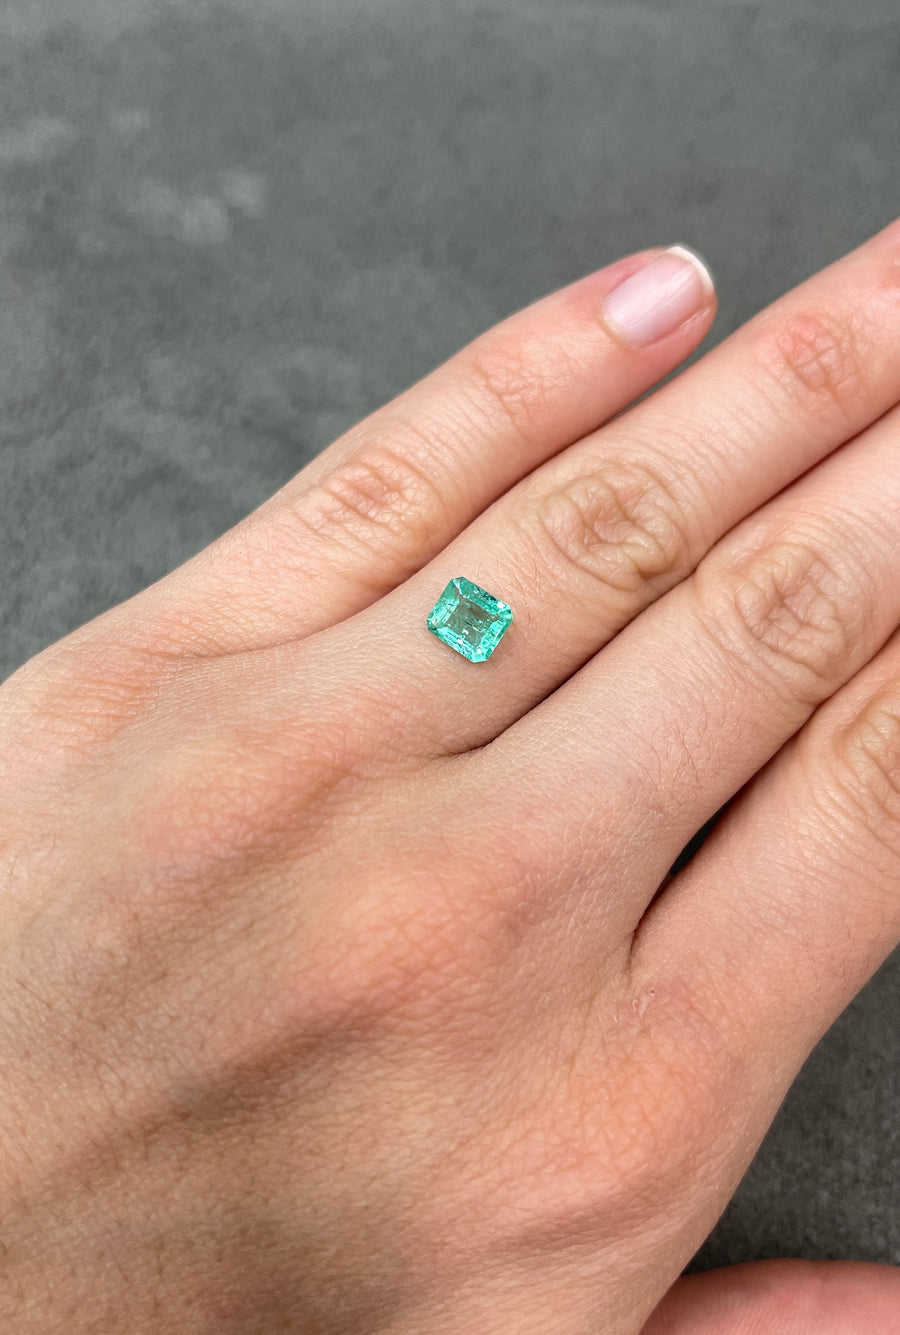 Colombian Emerald - 0.93 Carat Transparency in a Loose Gem